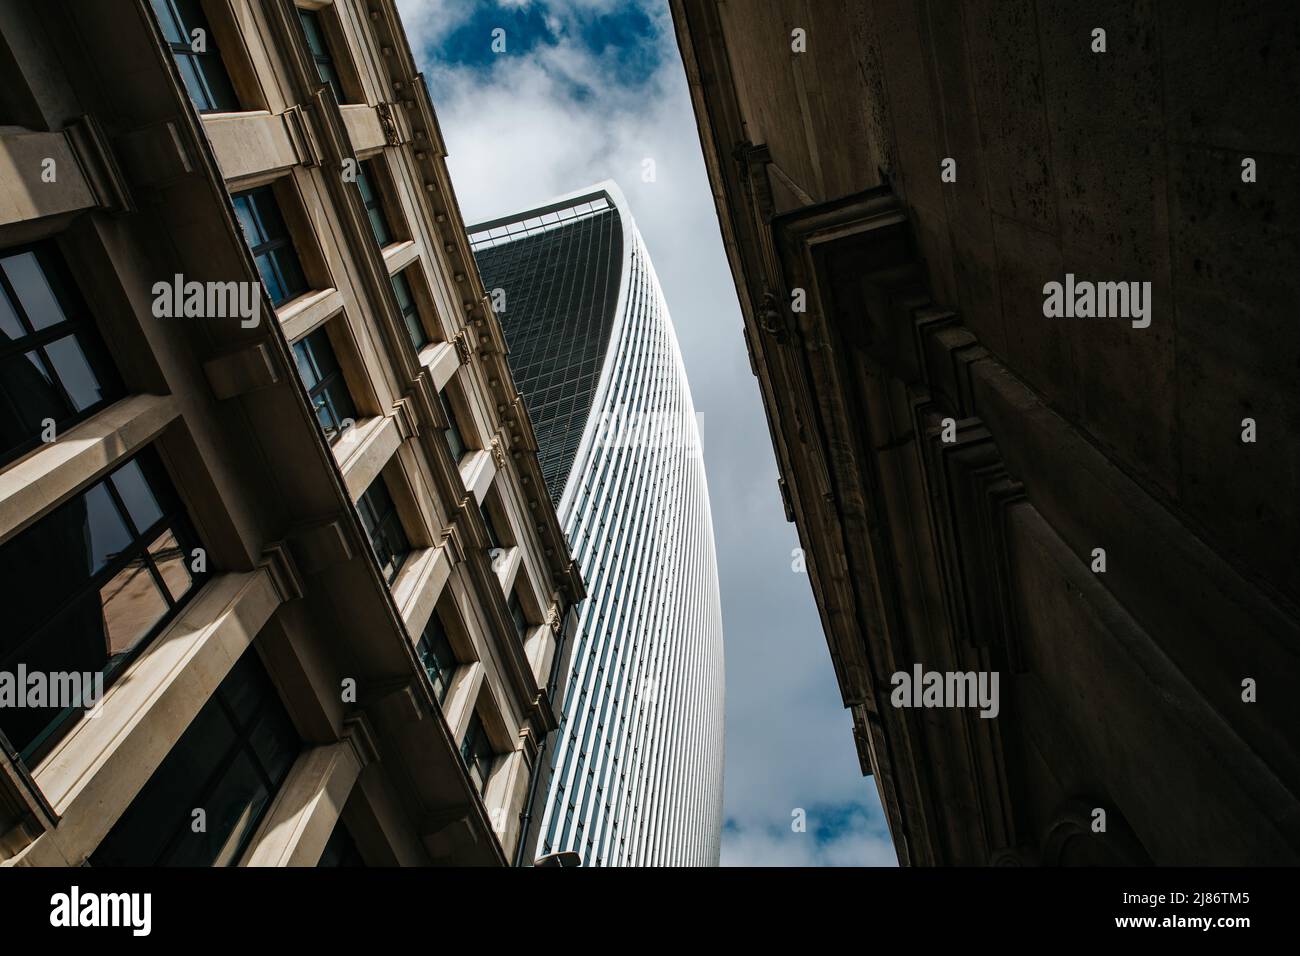 Looking up at 20 Fenchurch Street, London Stock Photo